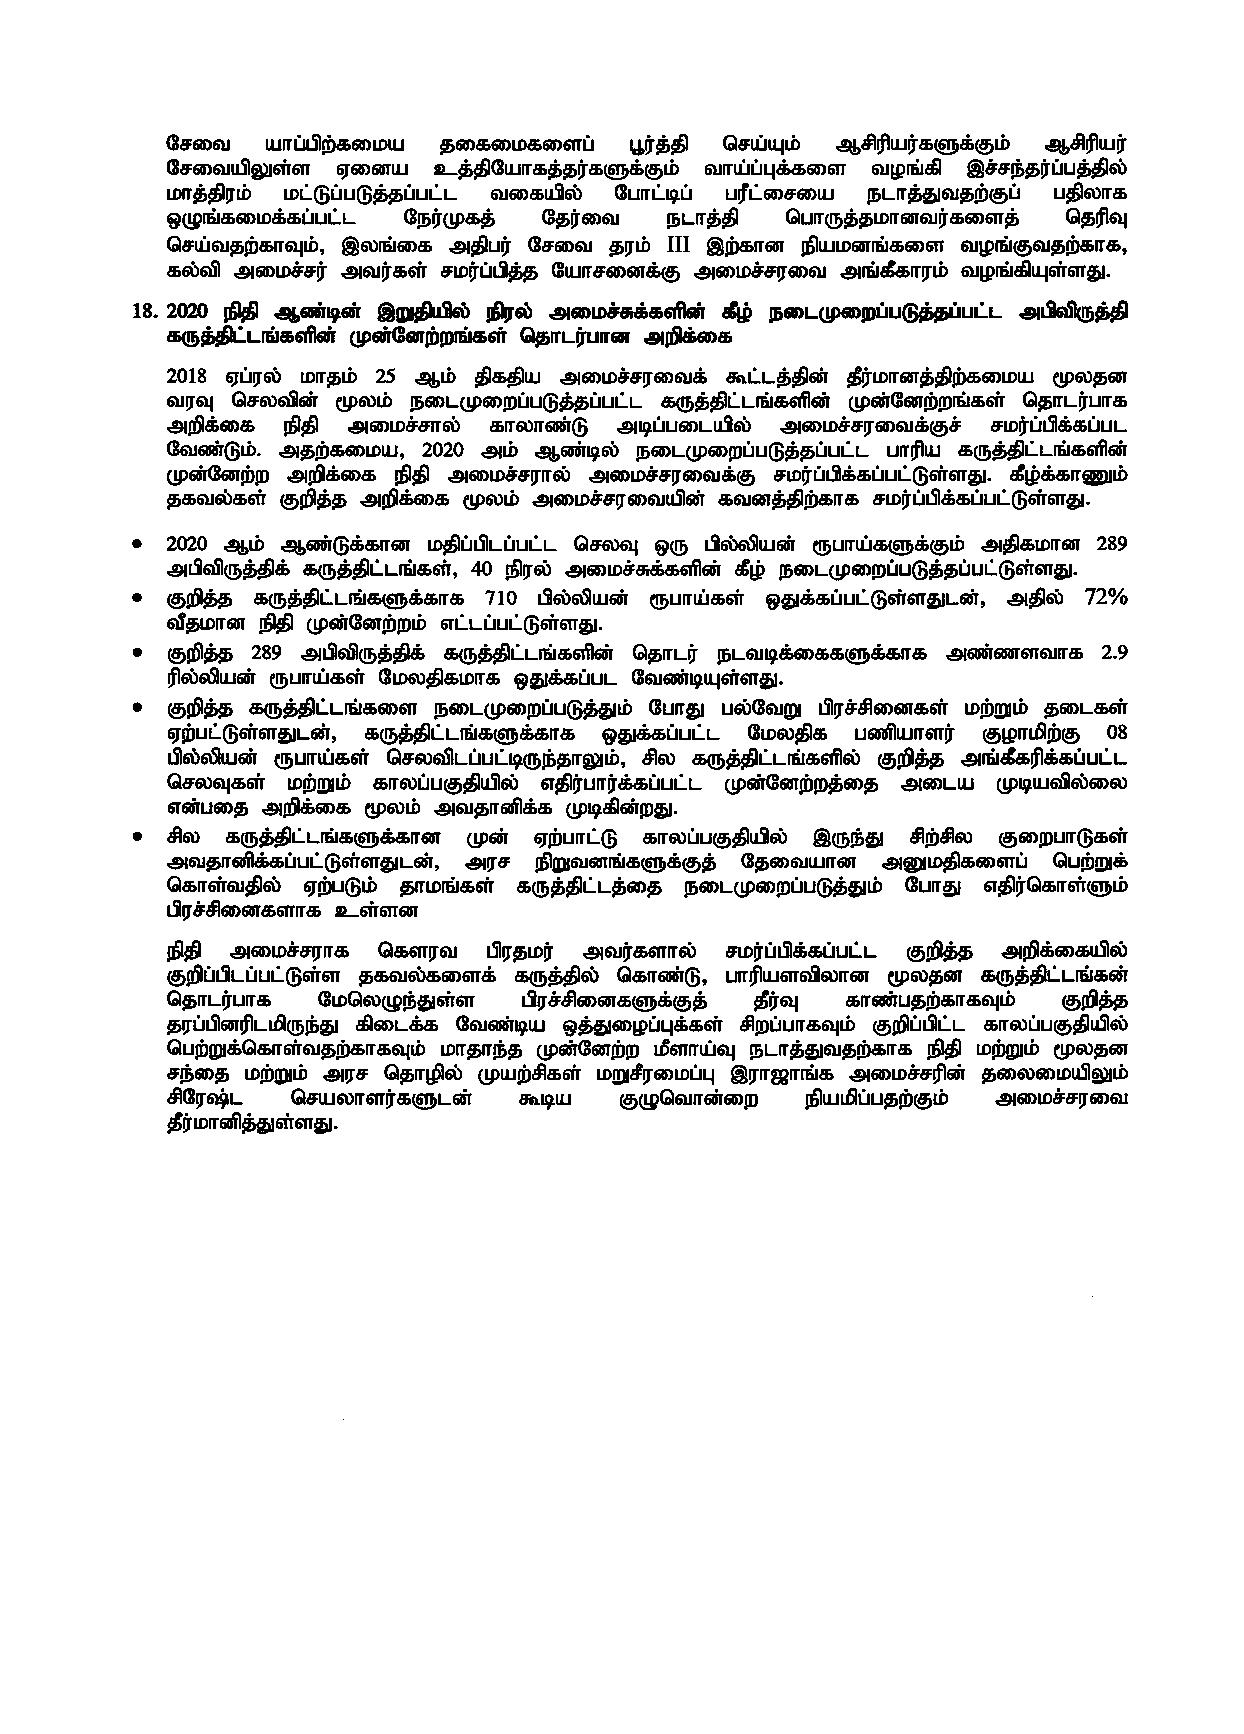 Cabinet Decision on 01.03.2021 Tamil page 005